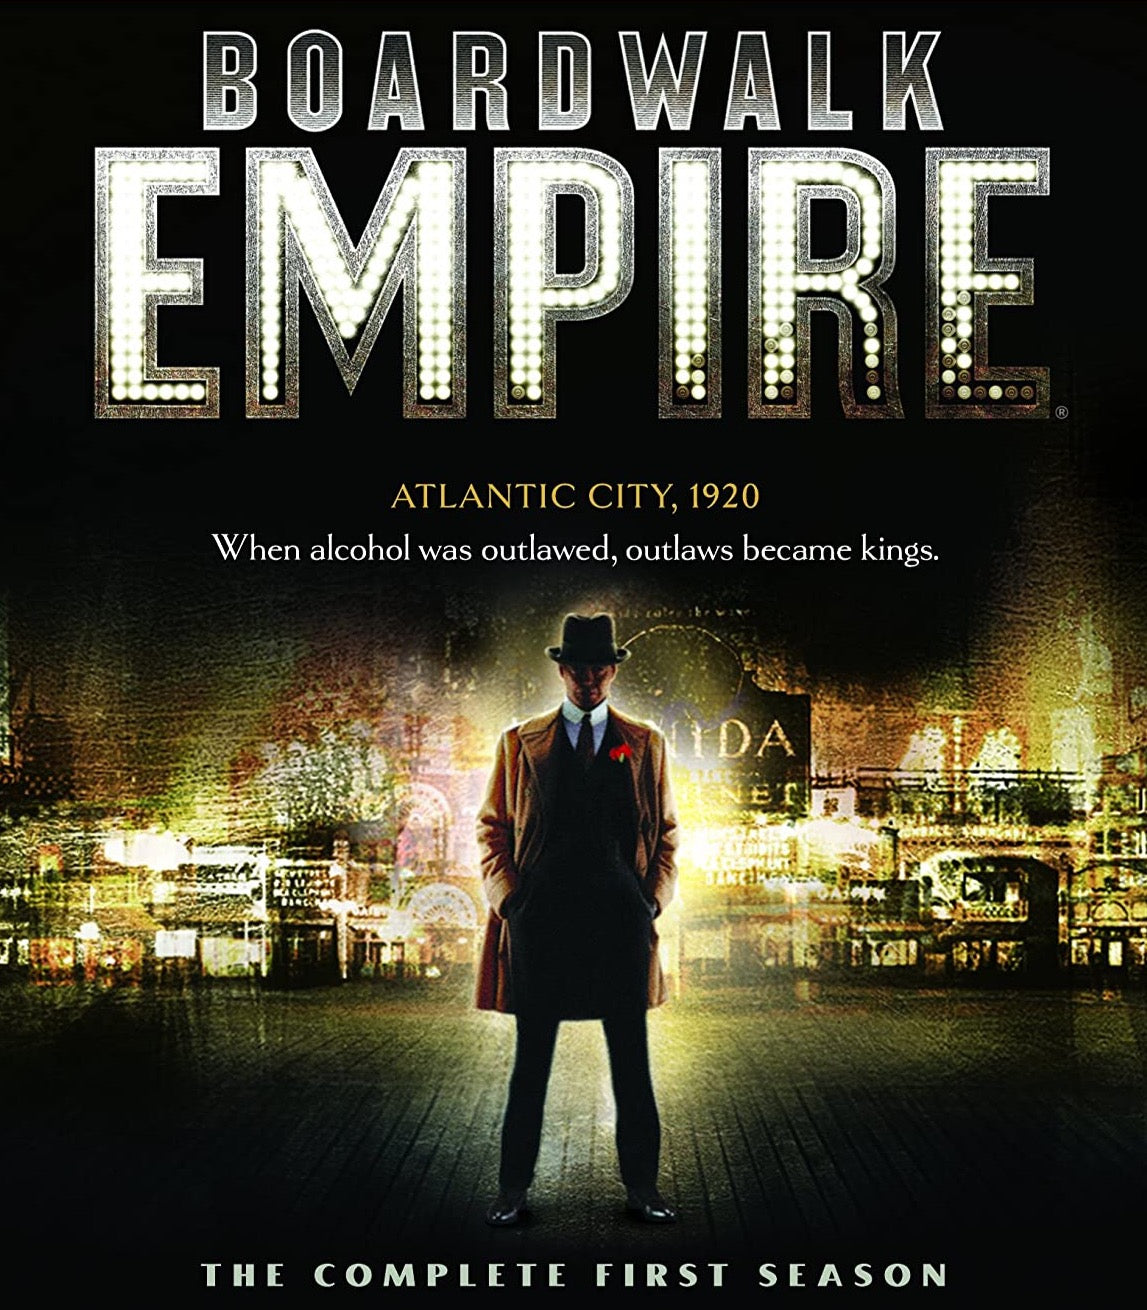 Boardwalk Empire: The Complete First Season (2010) iTunes HD redemption only